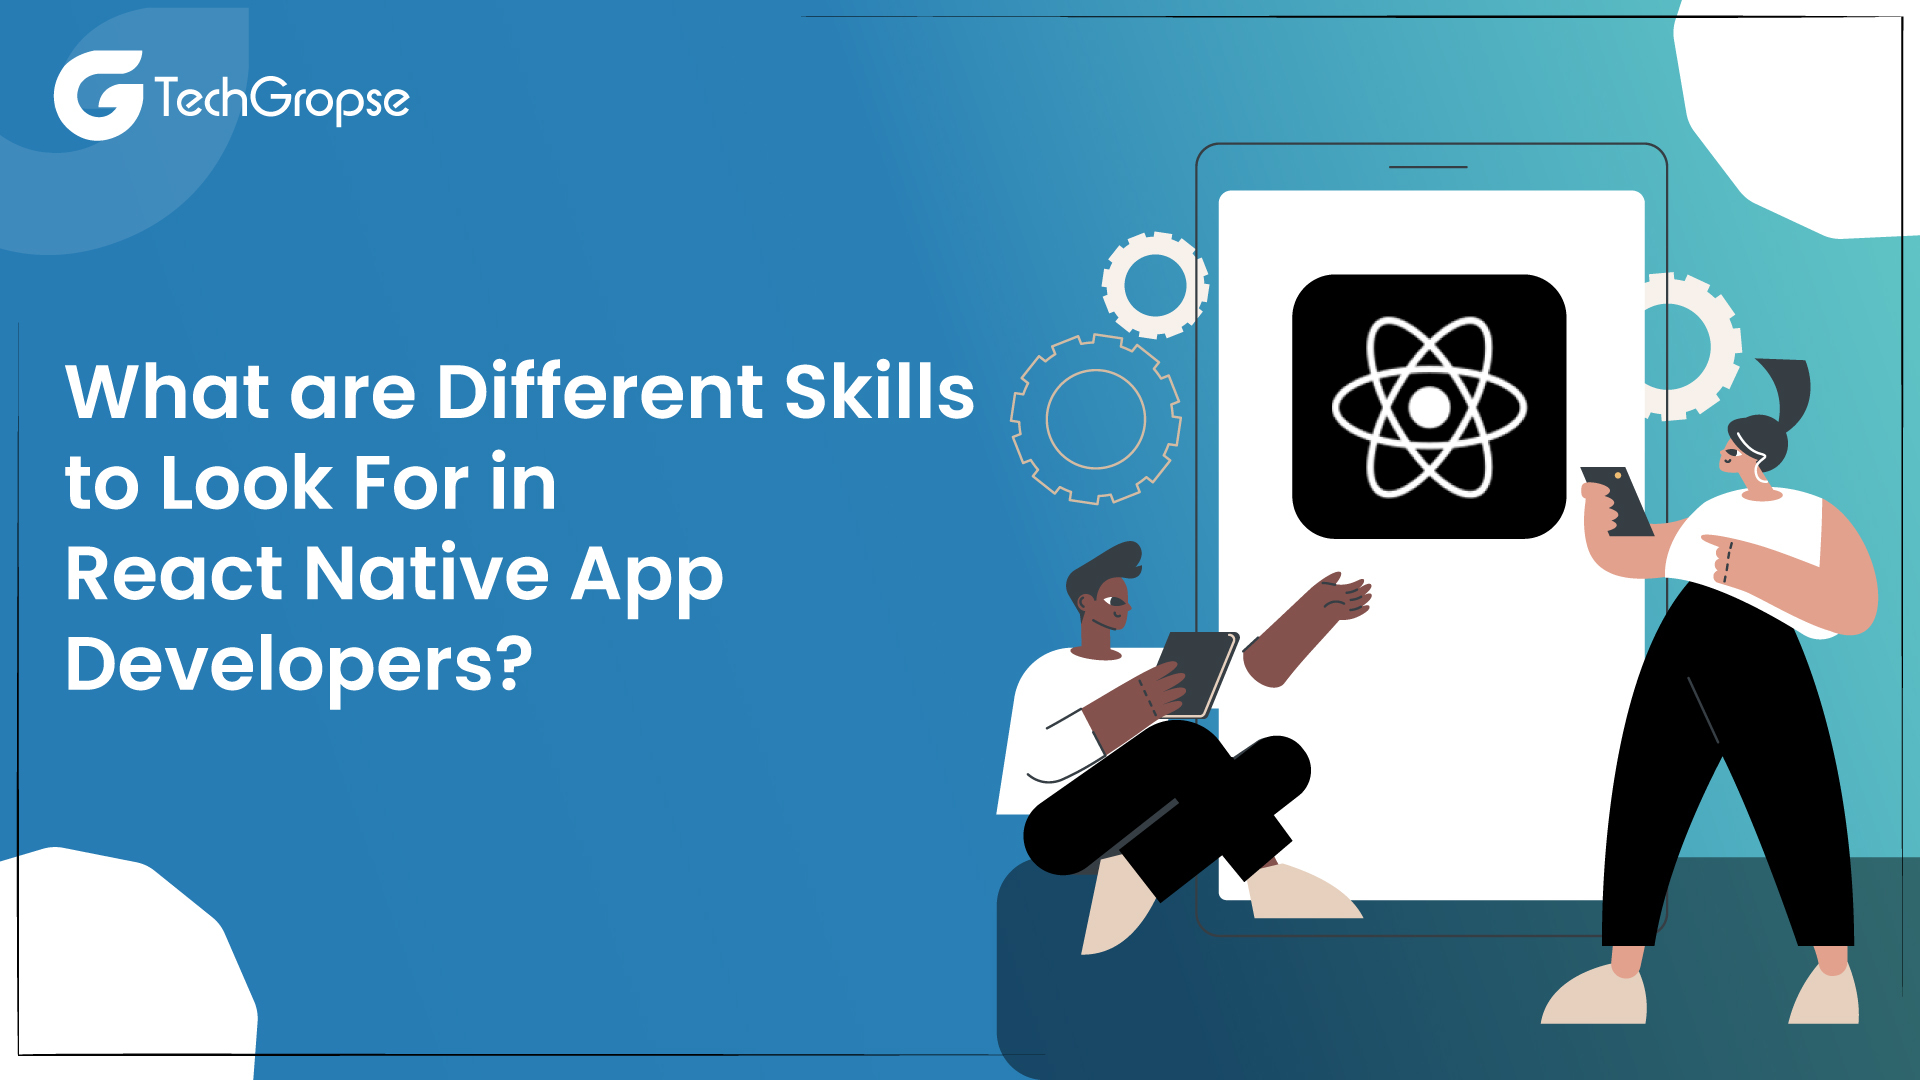 What are Different Skills to Look For in React Native App Developers?